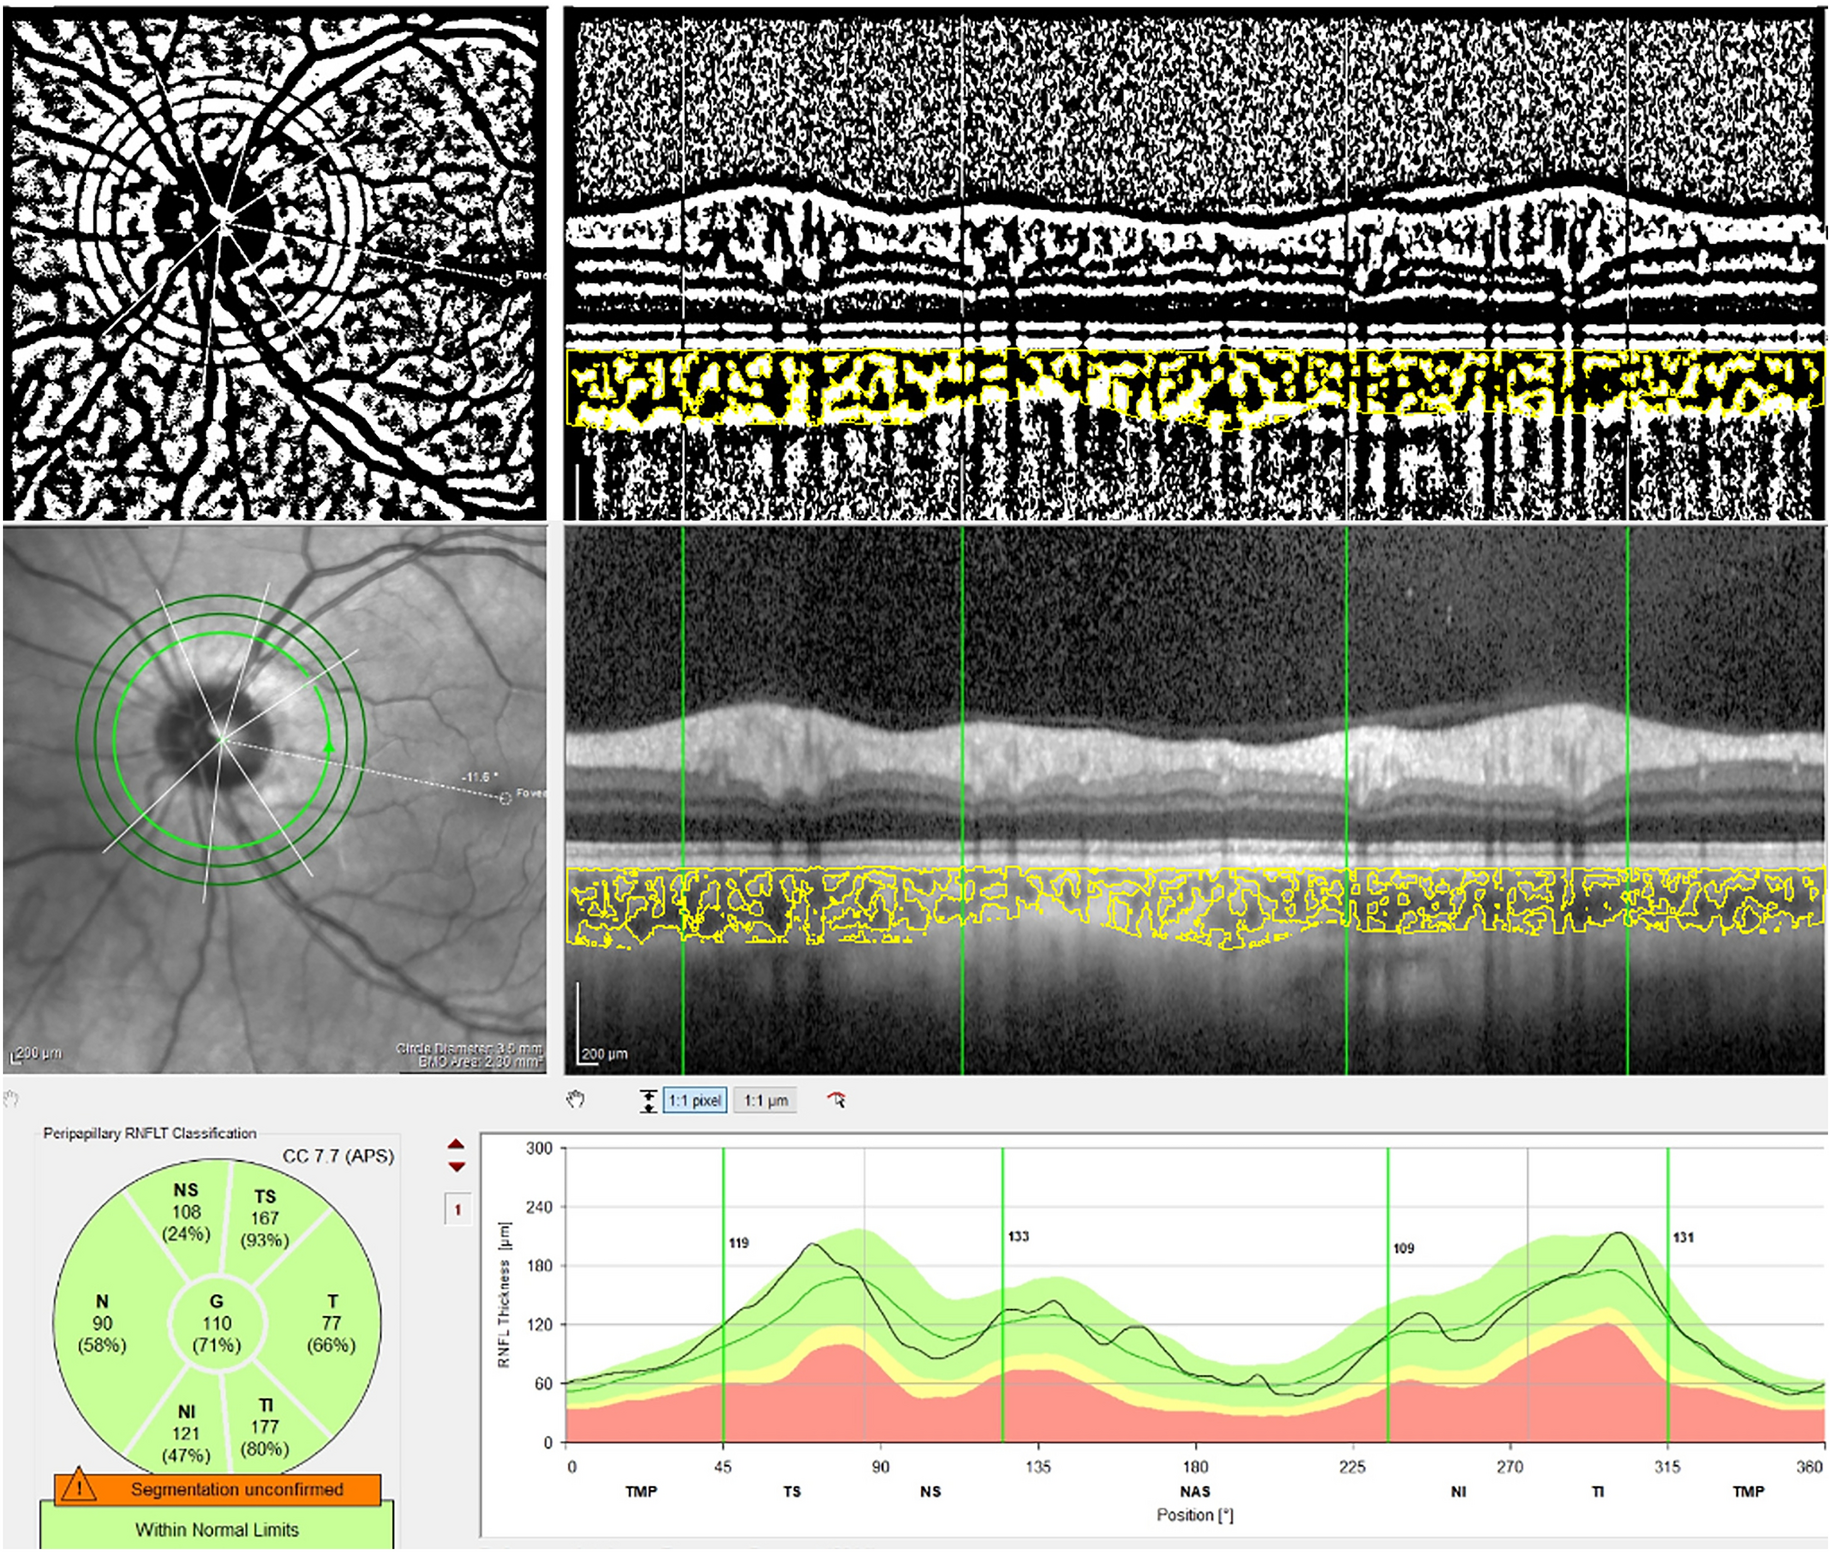 Vascular changes of the peripapillary choroidal area in the thyroid orbitopathy